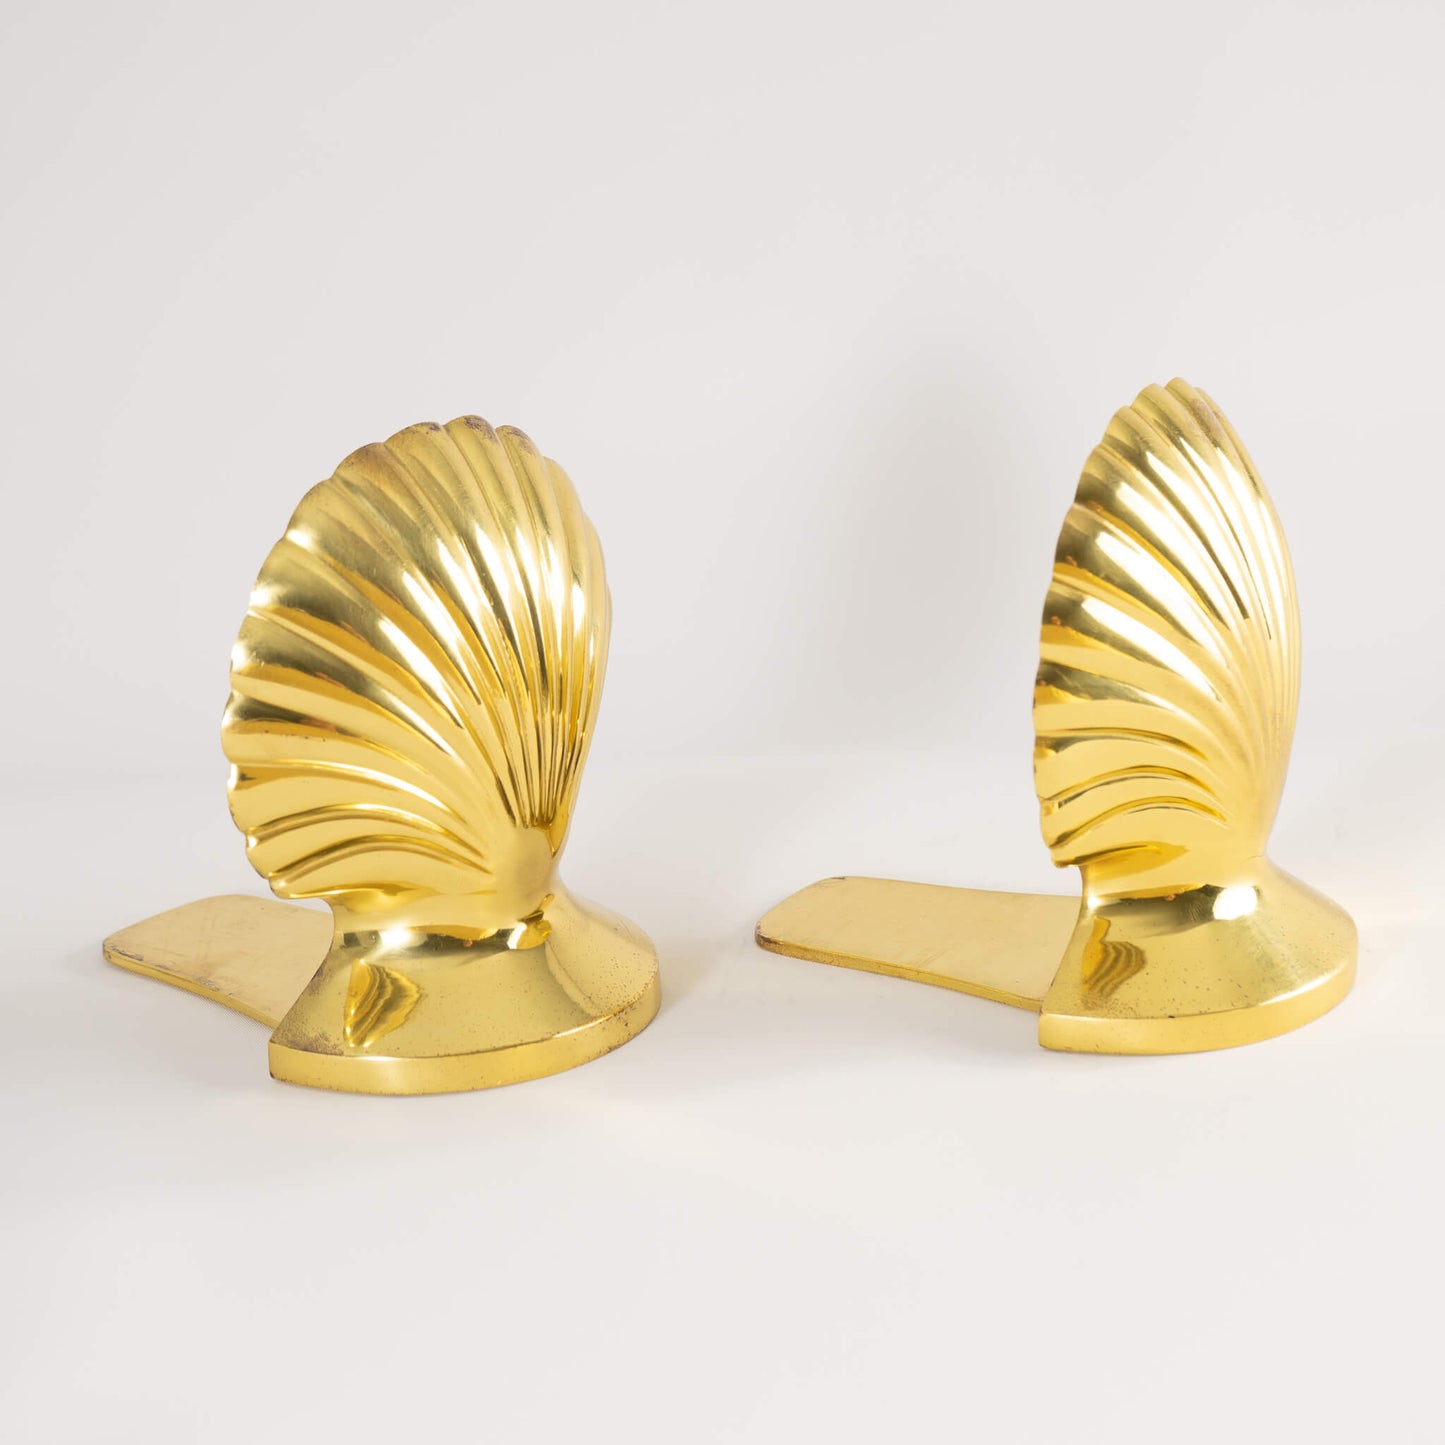 Vintage Brass Sea Shell Bookends